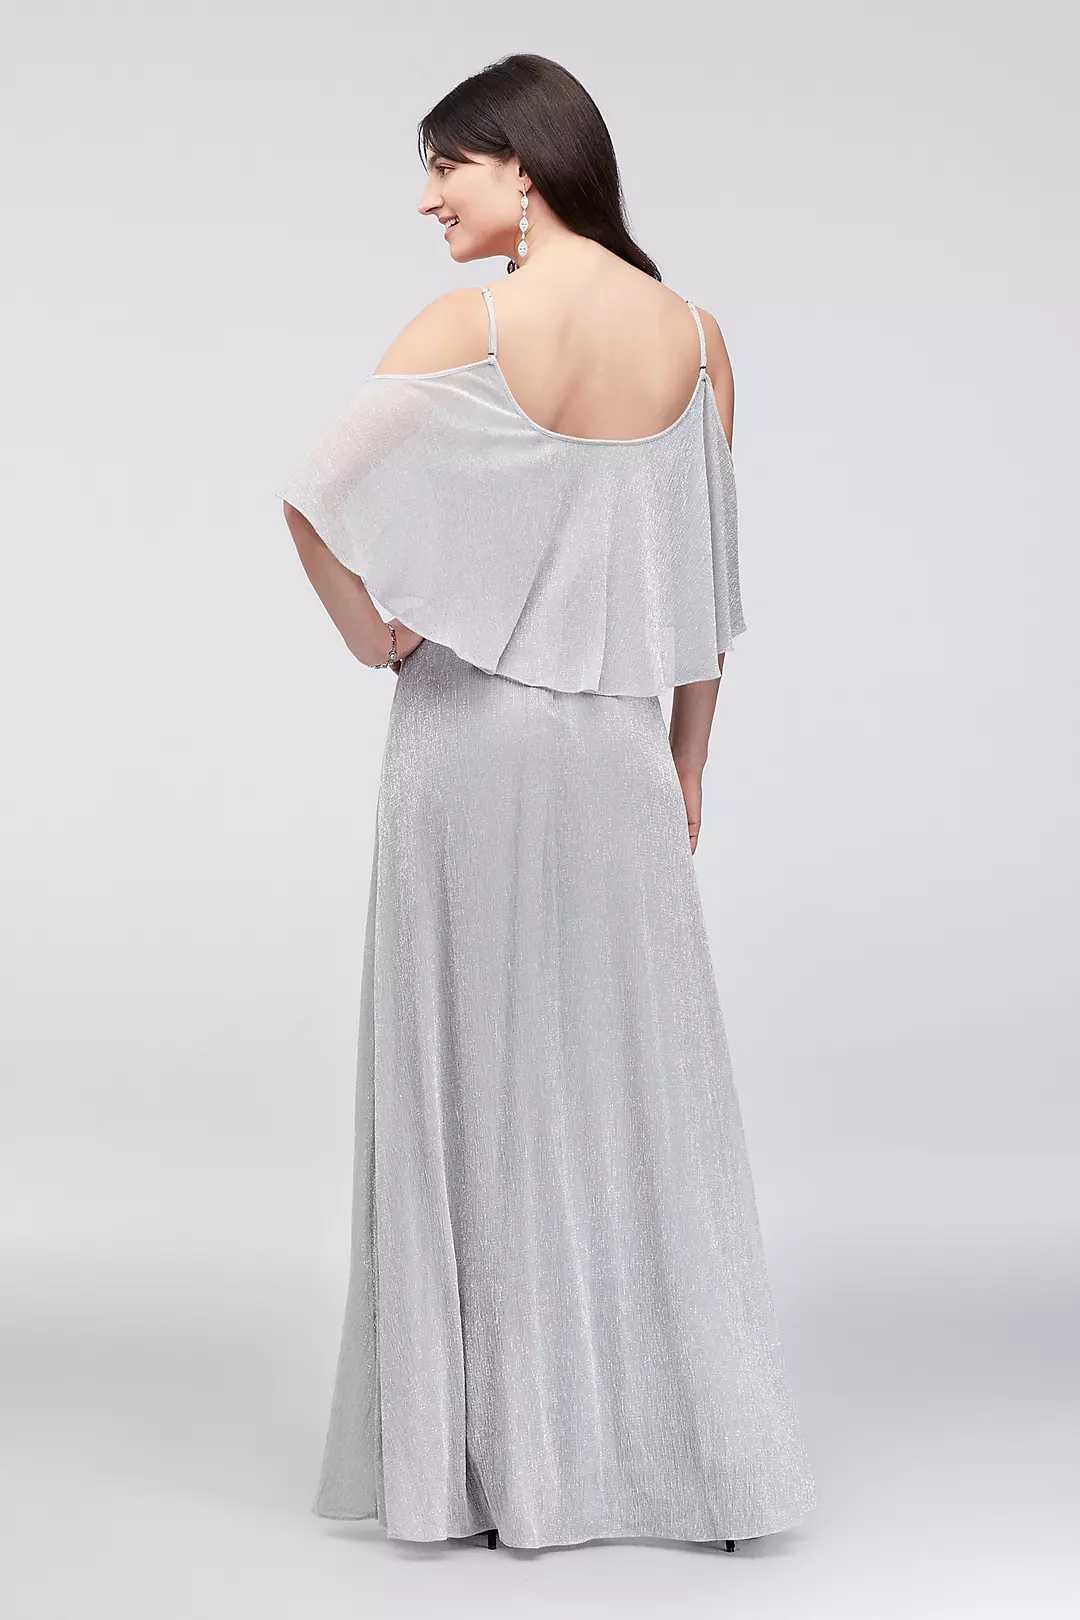 Sparkling Off-the-Shoulder Dress with Flounce Image 2